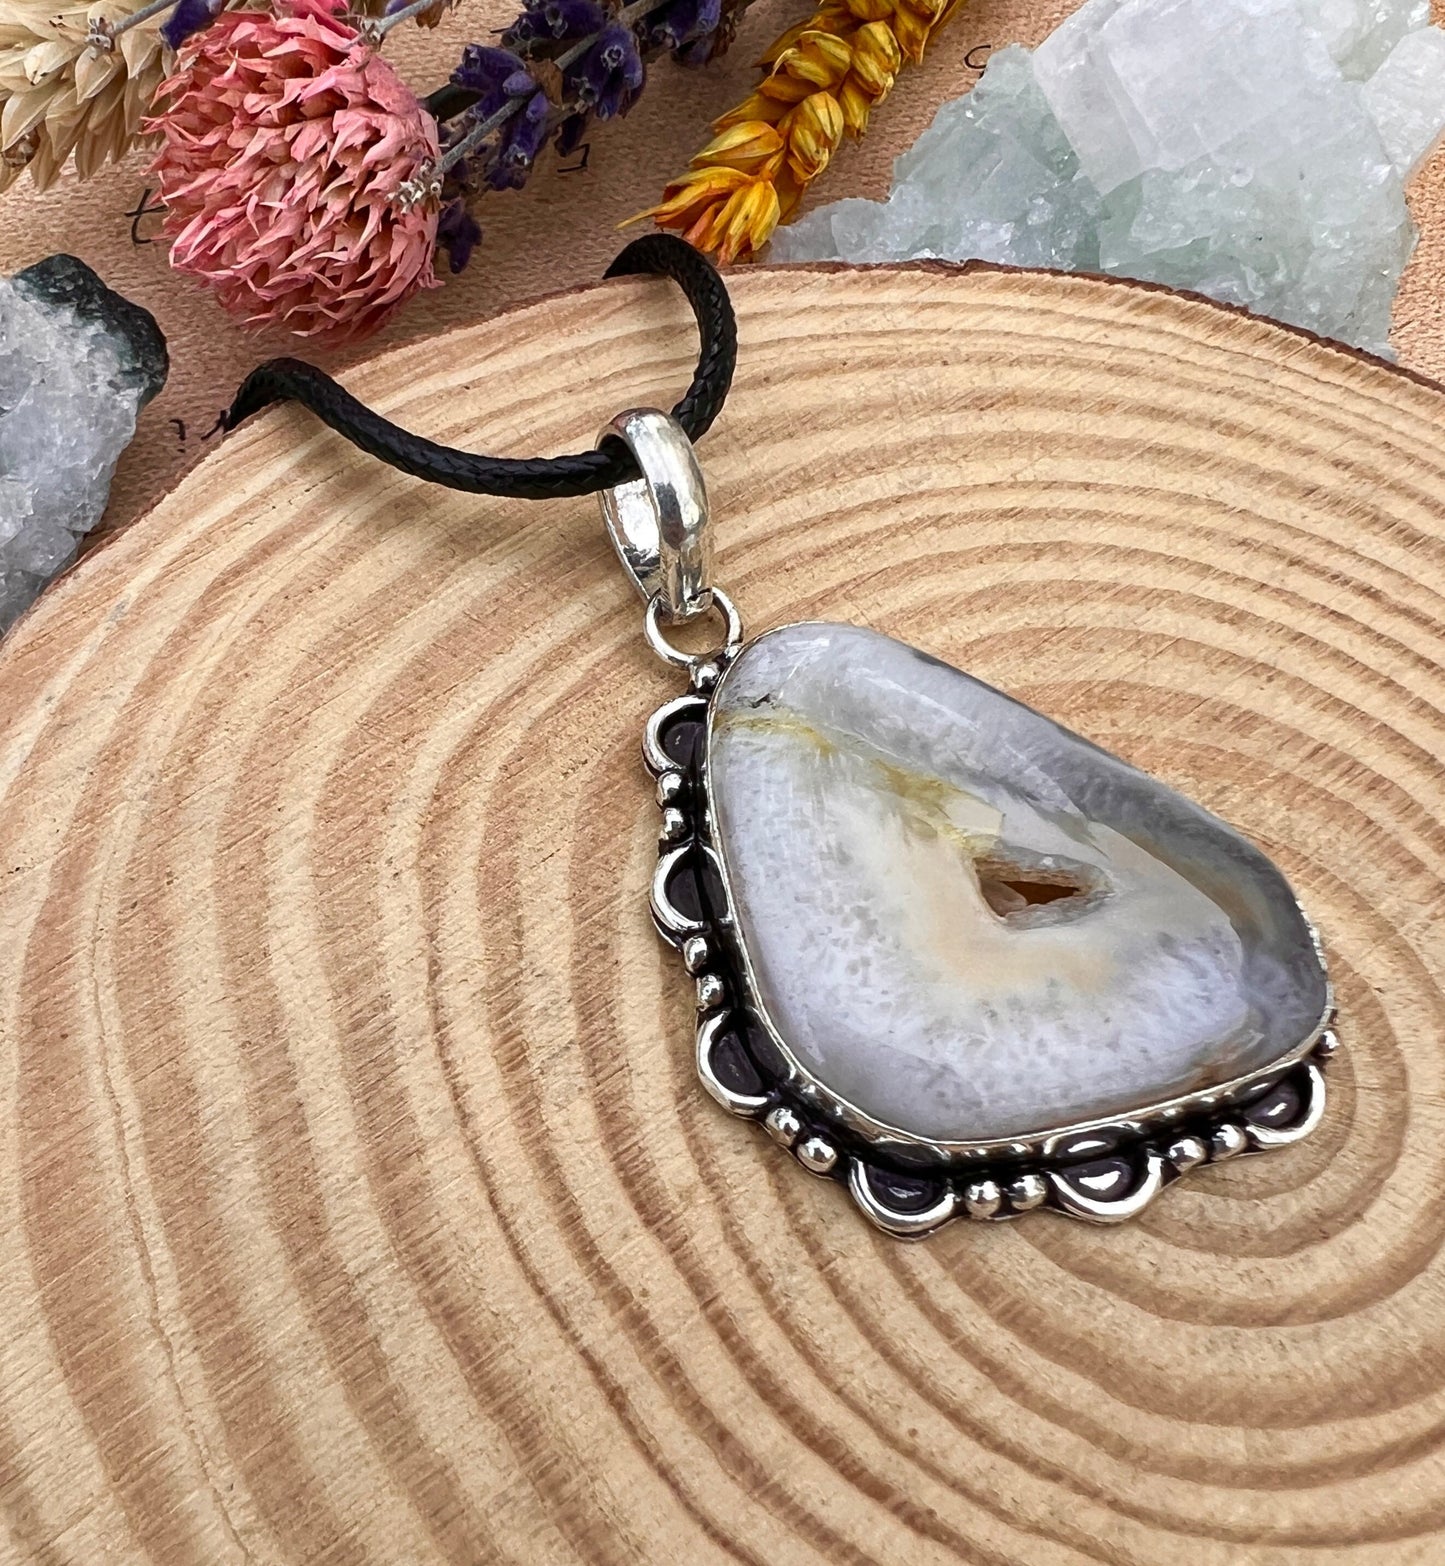 Natural Agate Pendant, Top Grade Agate Necklace In Sterling Silver, Crystal Jewellery One Of A Kind